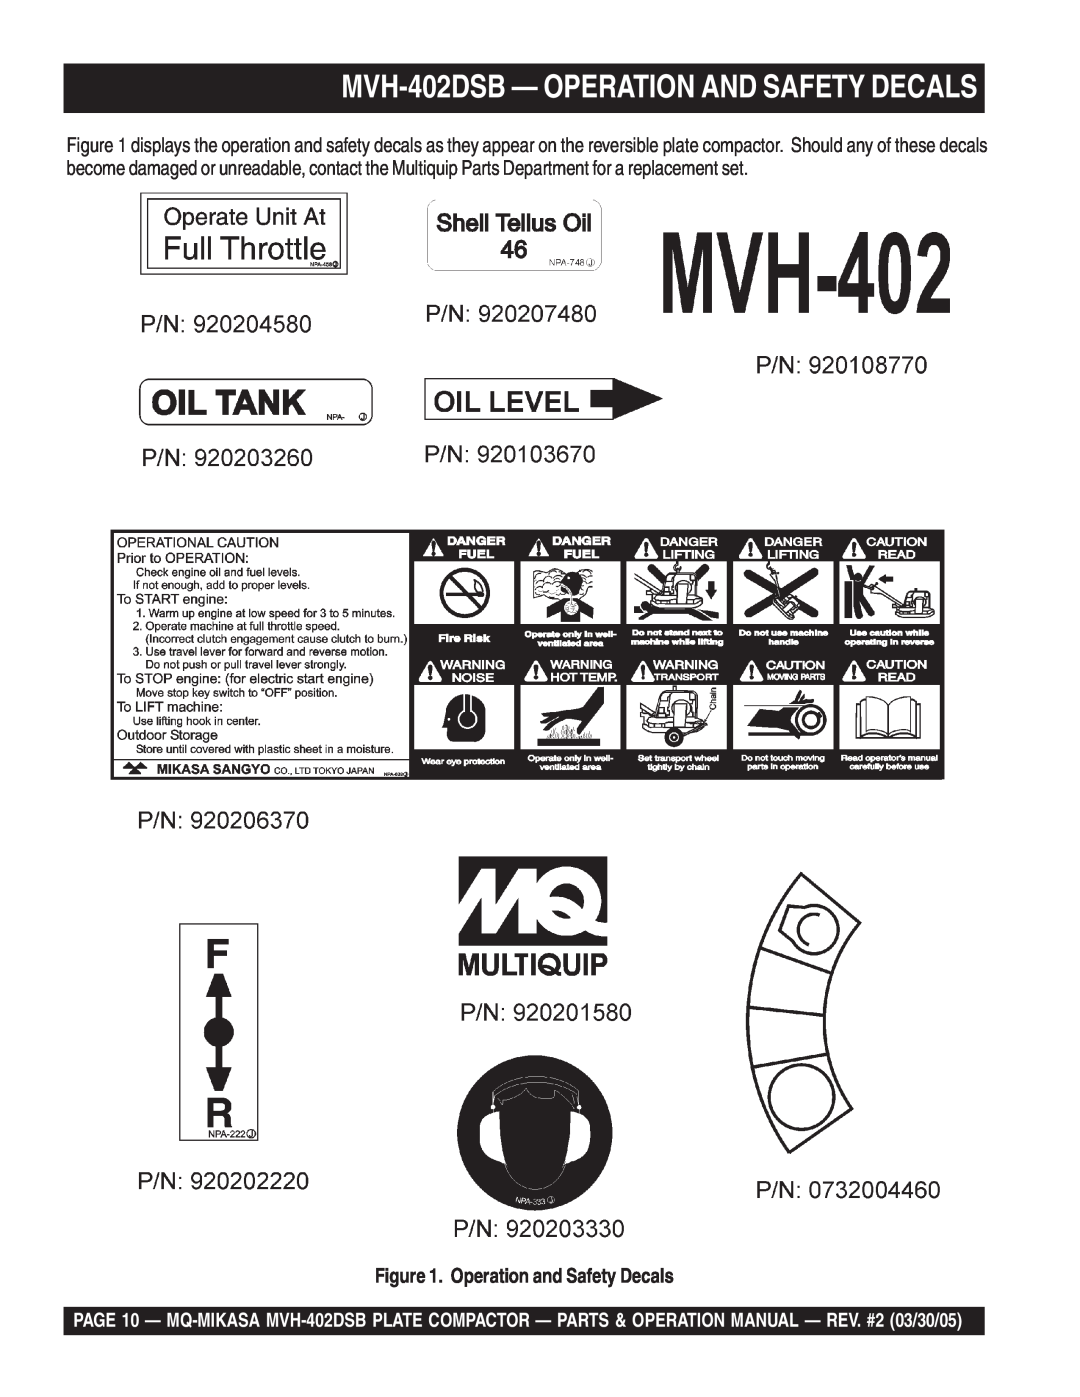 Multiquip manual MVH-402DSB- OPERATION AND SAFETY DECALS, Operation and Safety Decals 